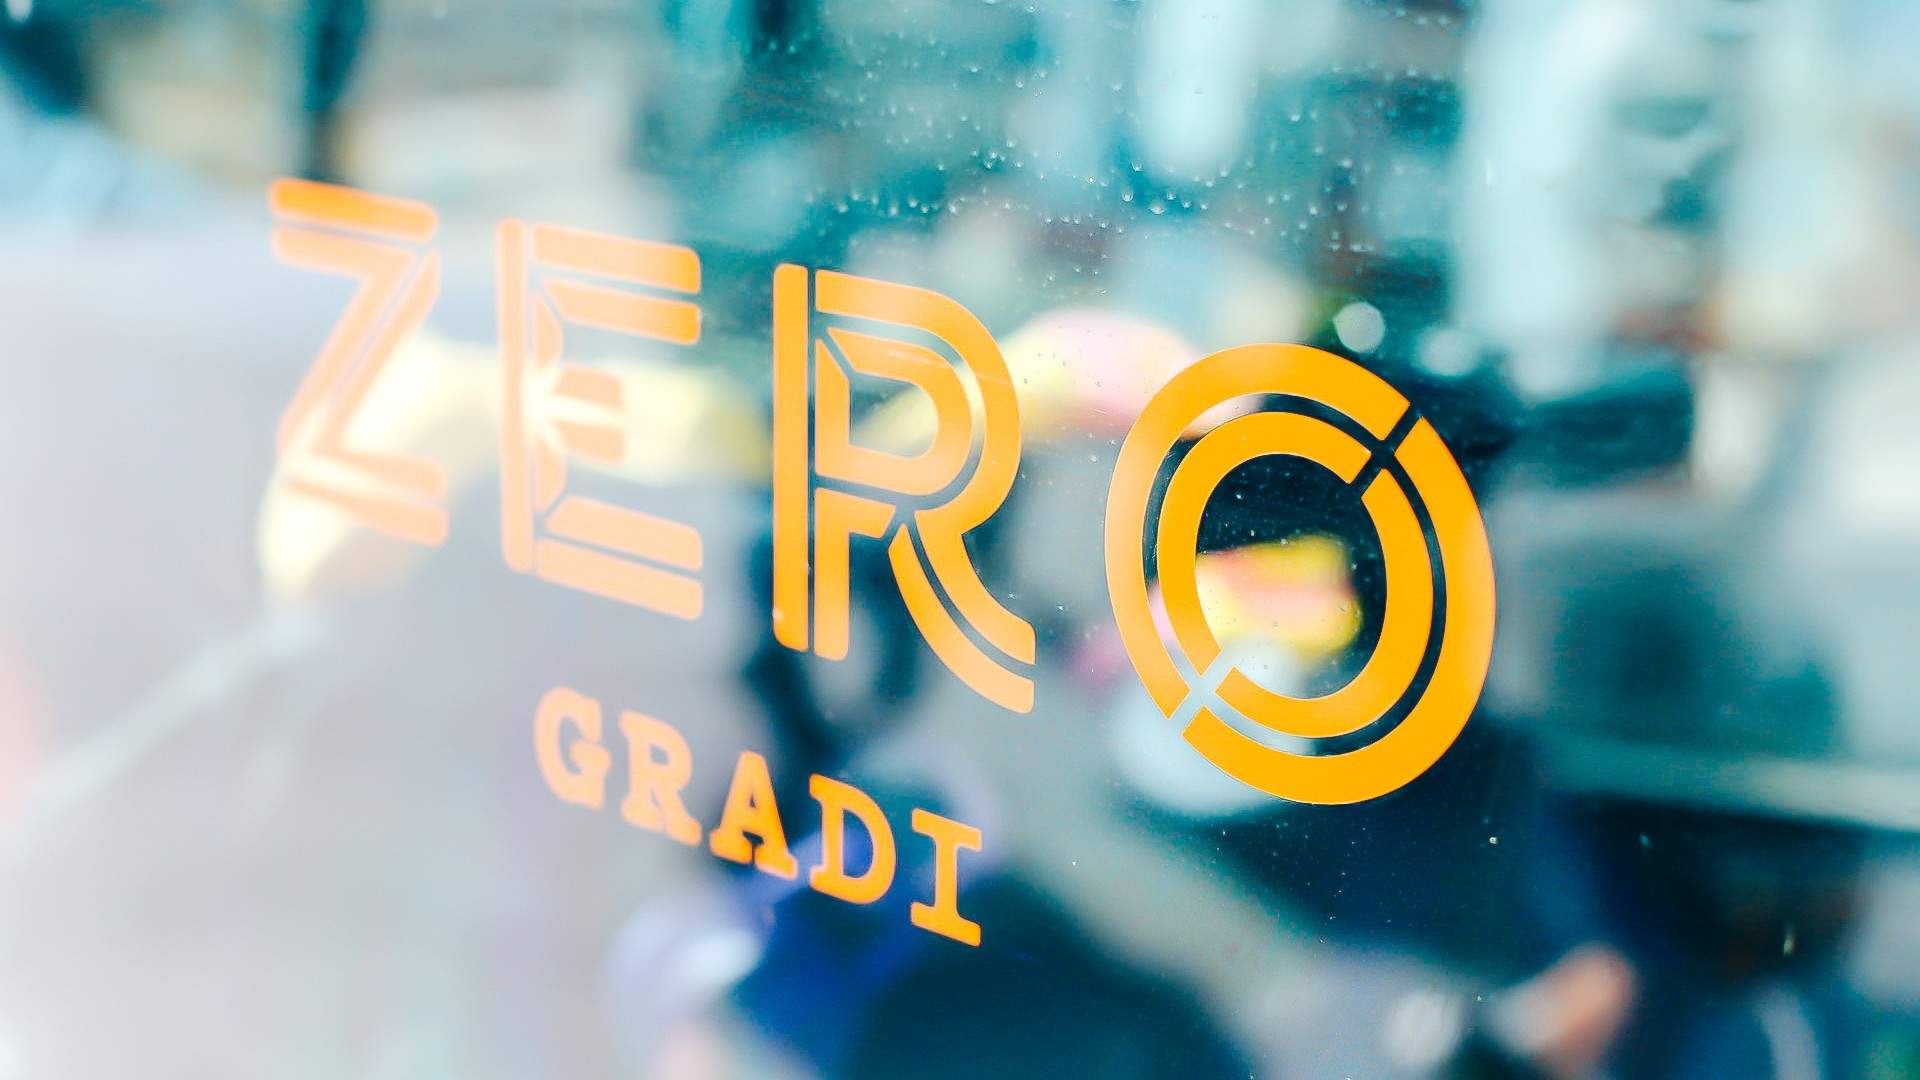 Zero Gradi Is Opening Its Second Dessert Bar and Gelateria in Southbank